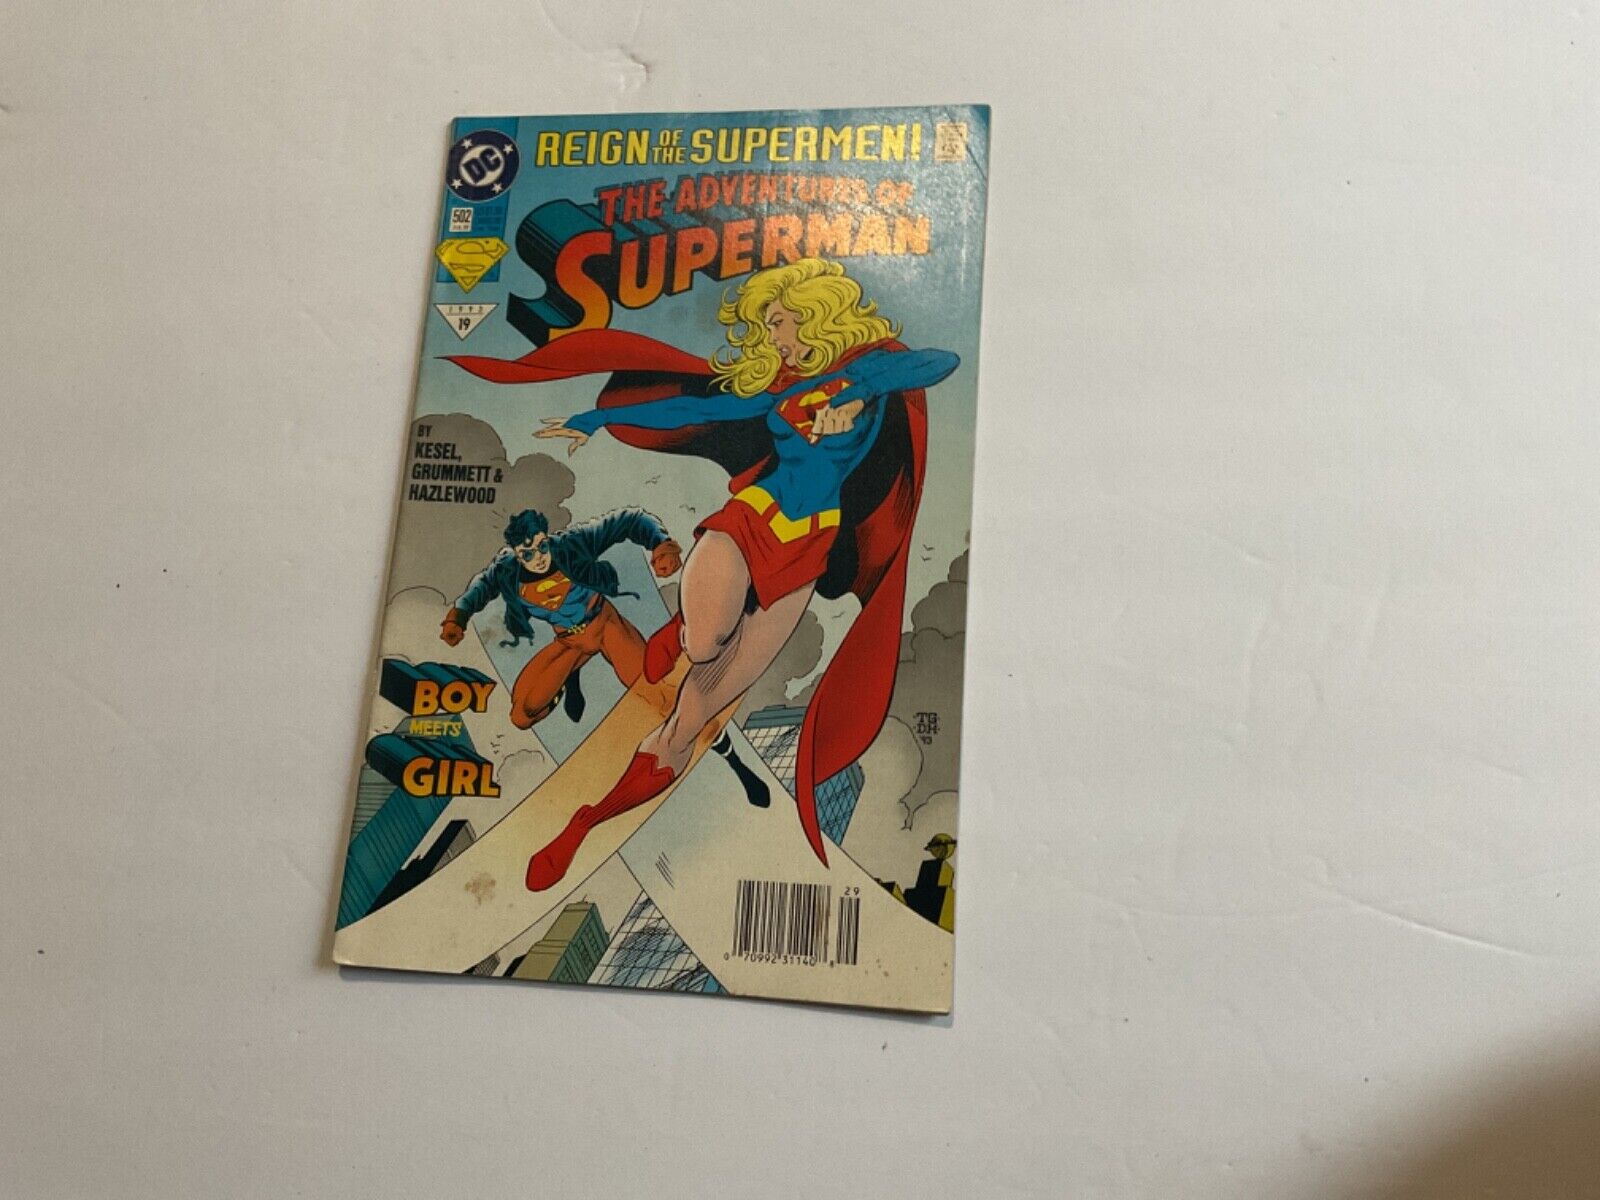 The Adventures of Superman #502 | Reign Of The Supermen!